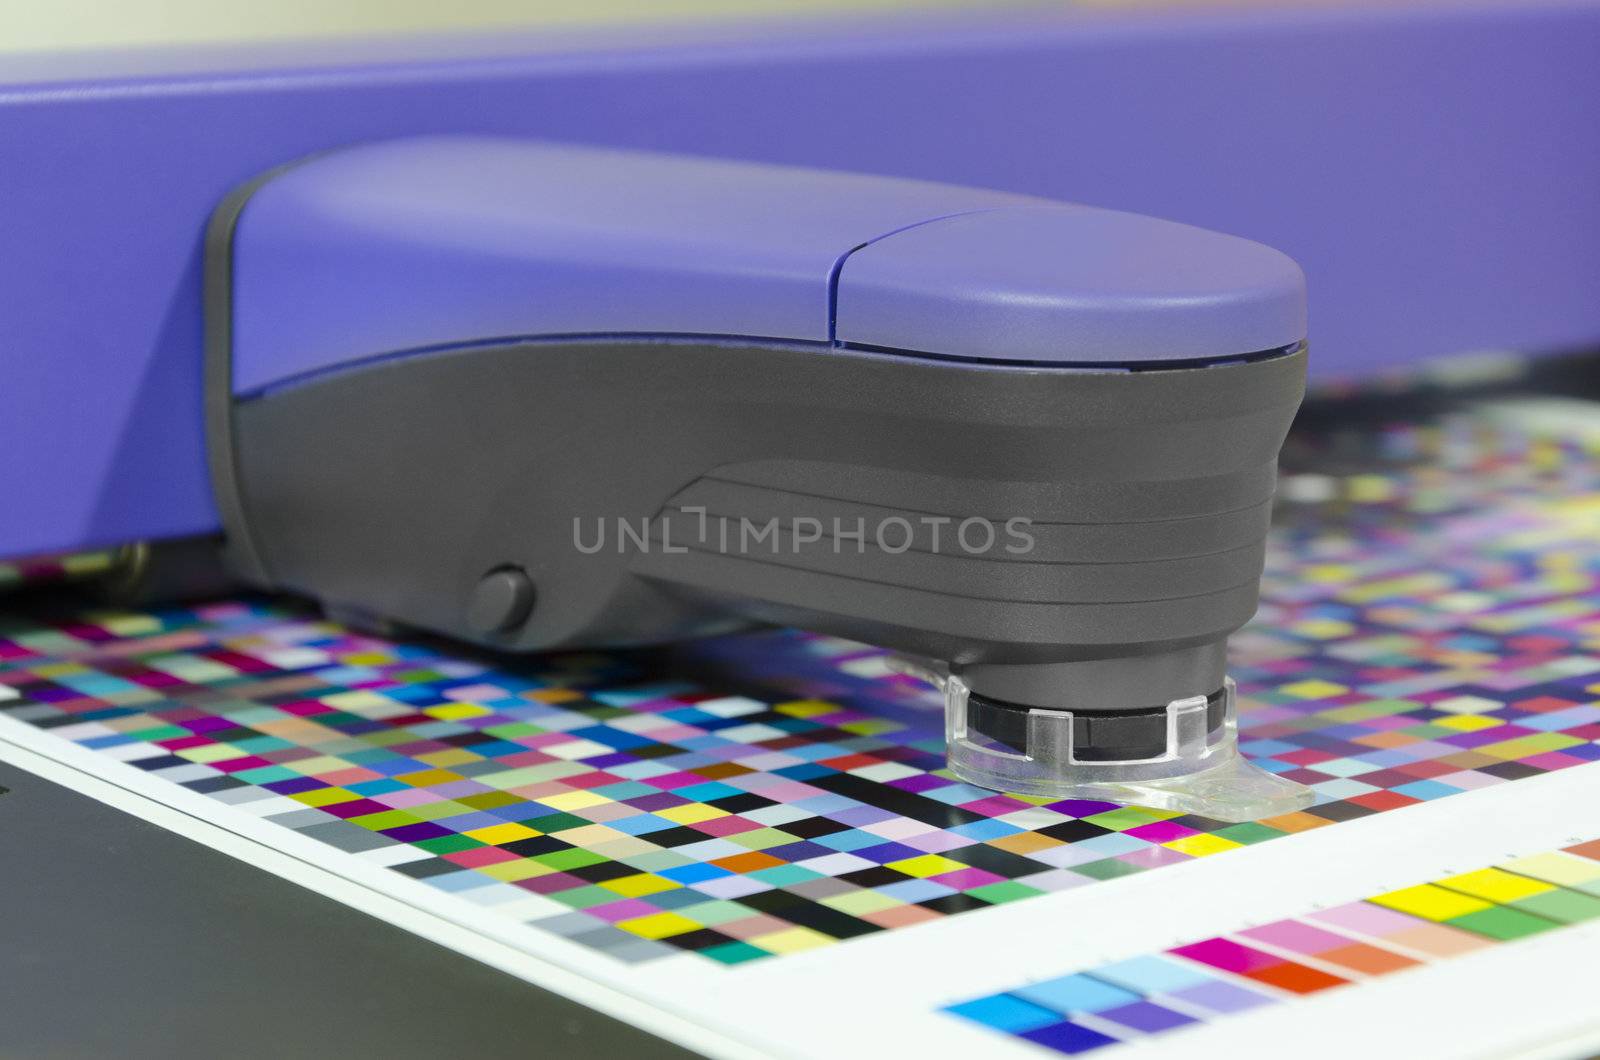 spectrophotometer measurment of color patches on Test Arch, print plant prepress department